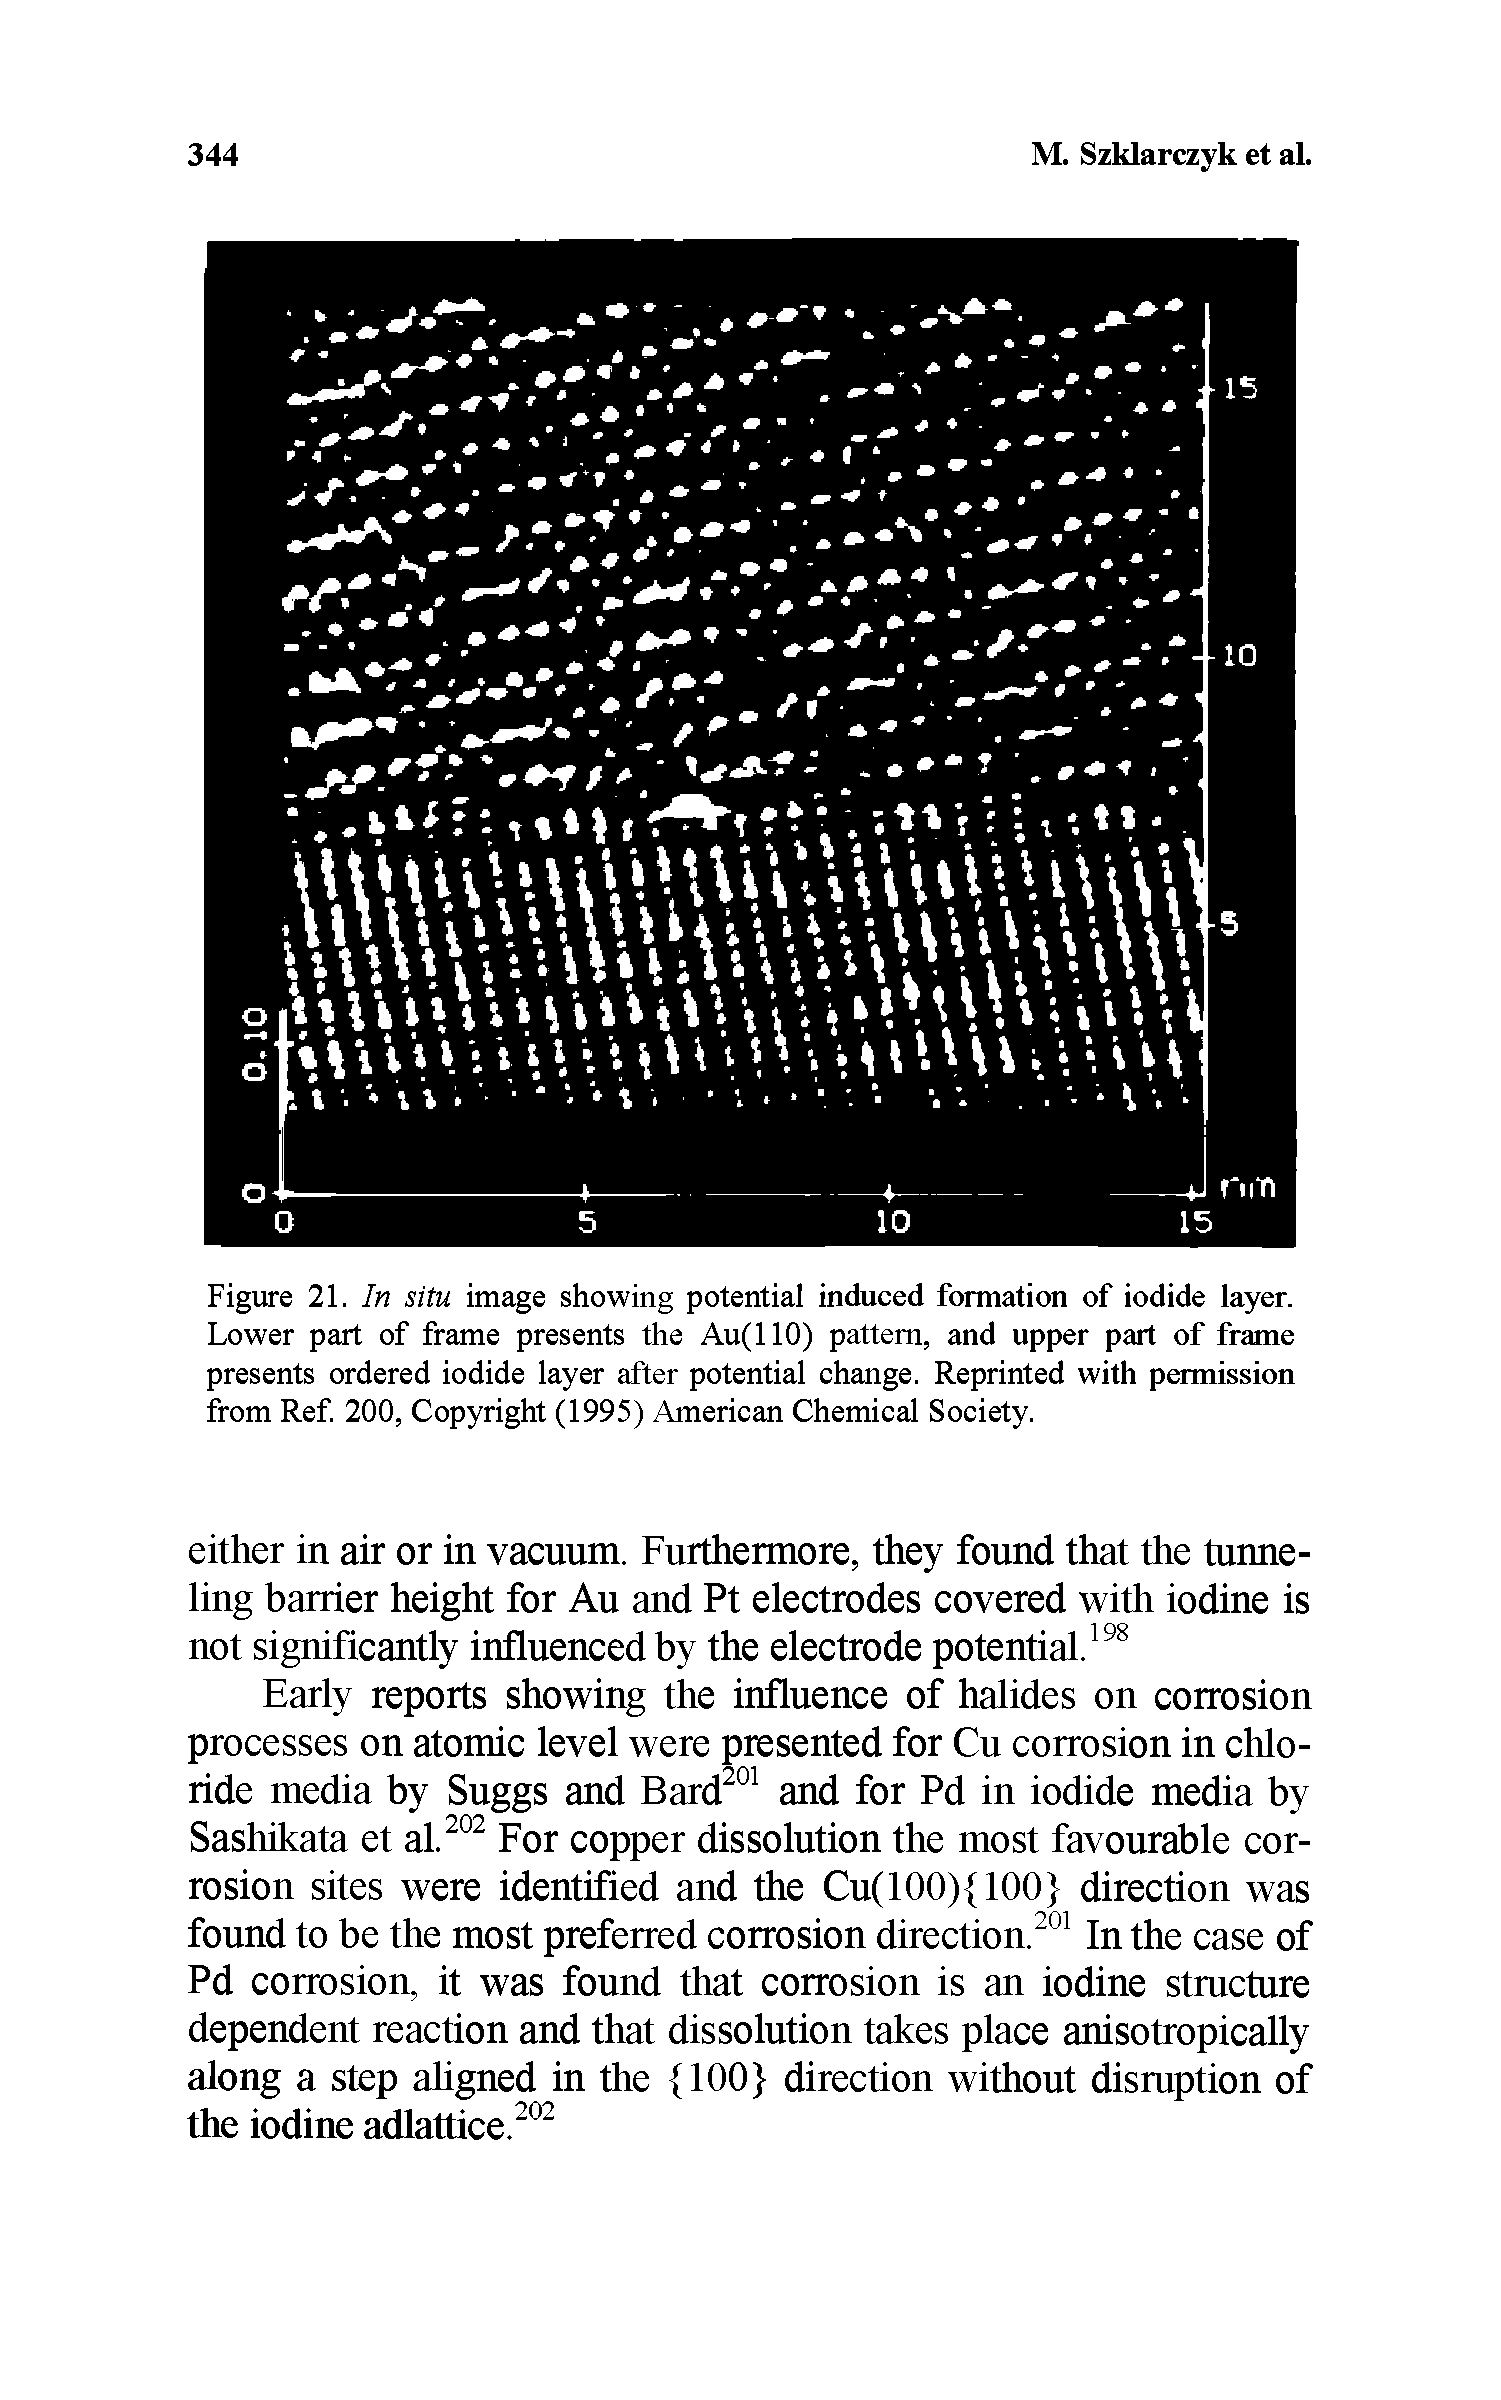 Figure 21. In situ image showing potential induced formation of iodide layer. Lower part of frame presents the Au(llO) pattern, and upper part of frame presents ordered iodide layer alter potential change. Reprinted with permission from Ref. 200, Copyright (1995) American Chemical Society.